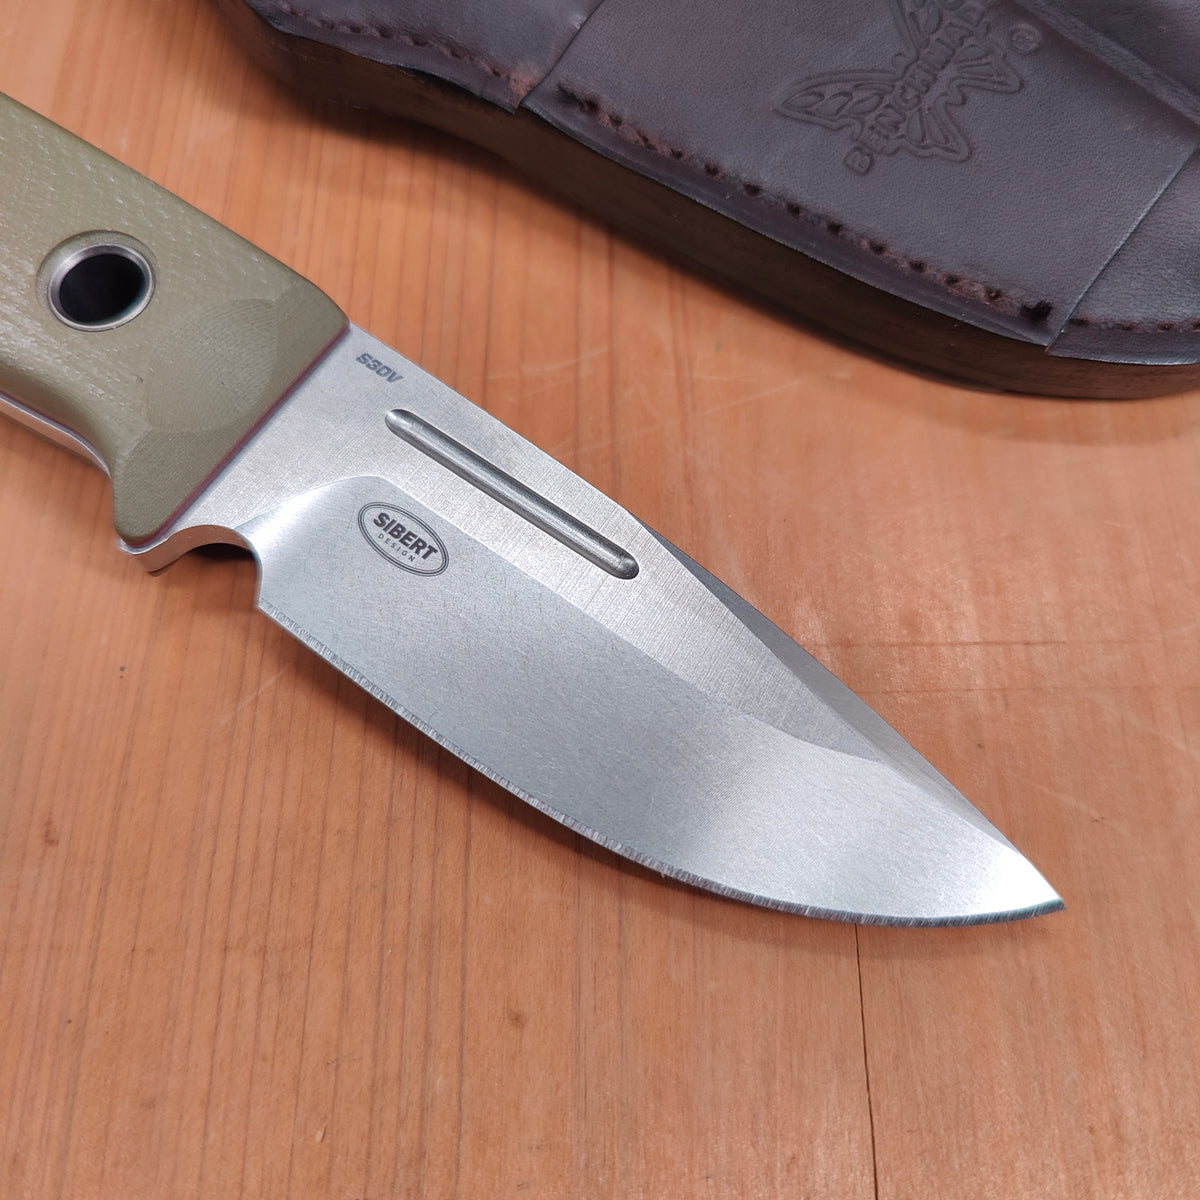 Benchmade 165-1 Mini Bushcrafter 3.4" Drop Point CPM-S30V Fixed Blade OD Green G10 Handle with Leather Sheath